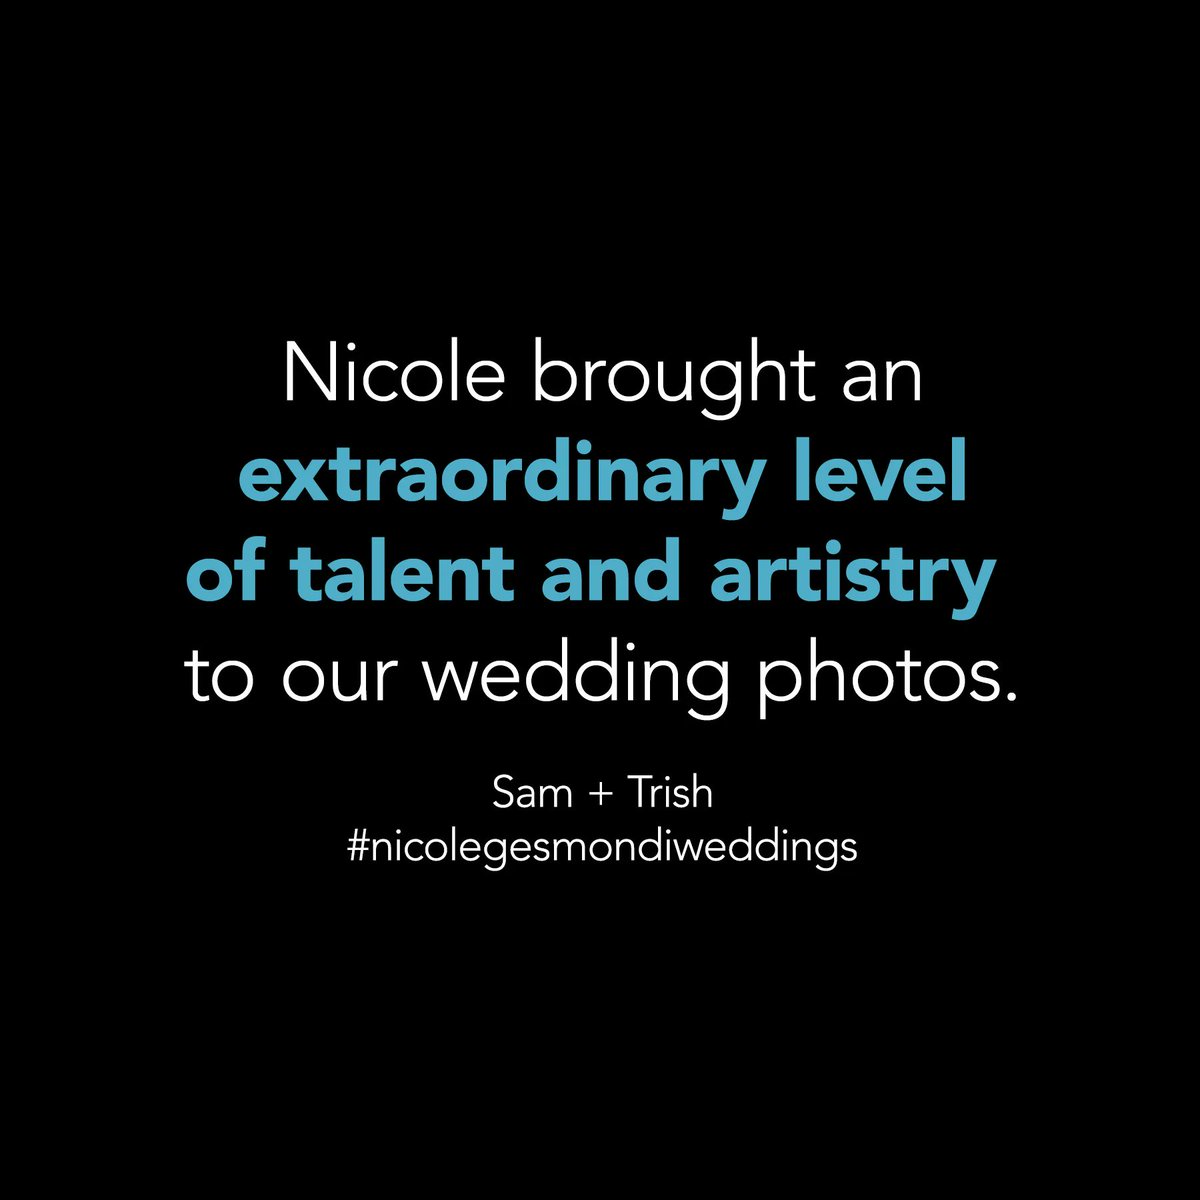 Visit buff.ly/2YRmYxM to learn more about our wedding photography! 
#weddingphotographer #withyourmemoriesinmind